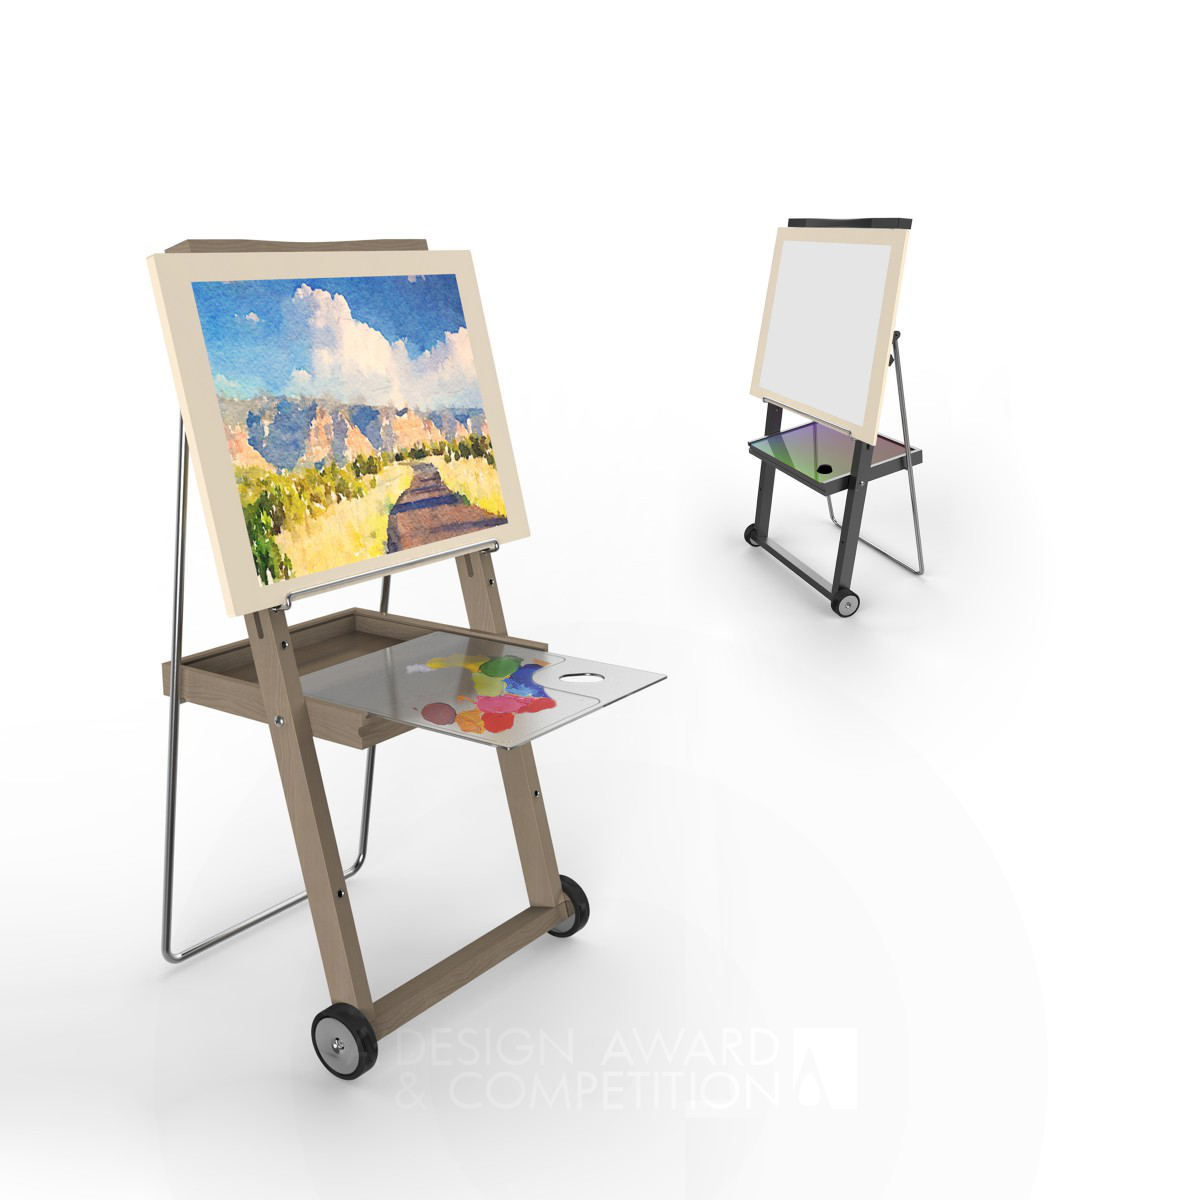 Wenkai Xue wins Iron at the prestigious A' Art and Stationery Supplies Design Award with Free and Easy Easel.